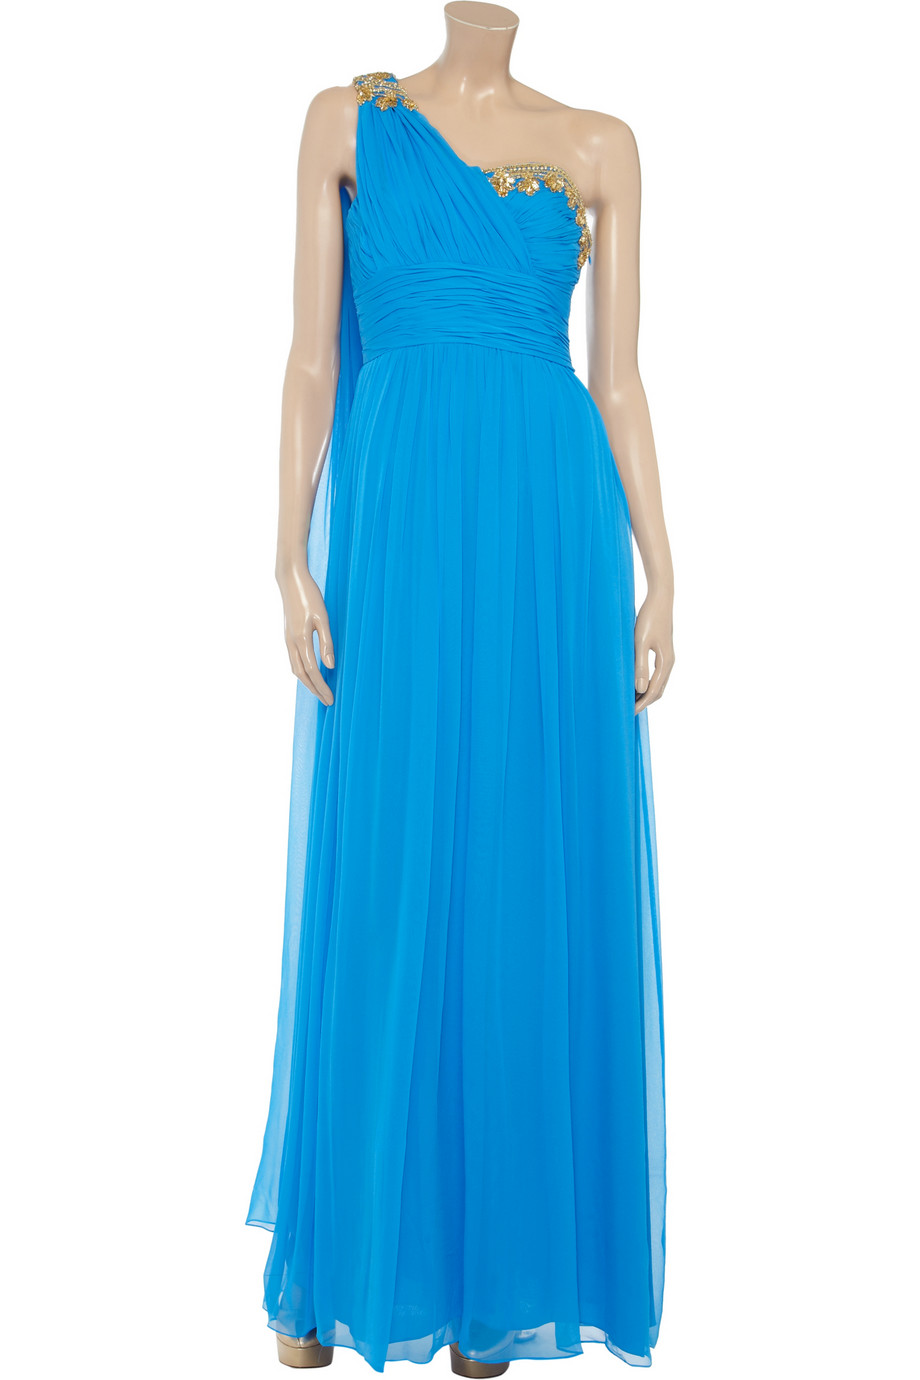 Lyst - Notte By Marchesa Embellished One Shoulder Silk Chiffon Gown in Blue